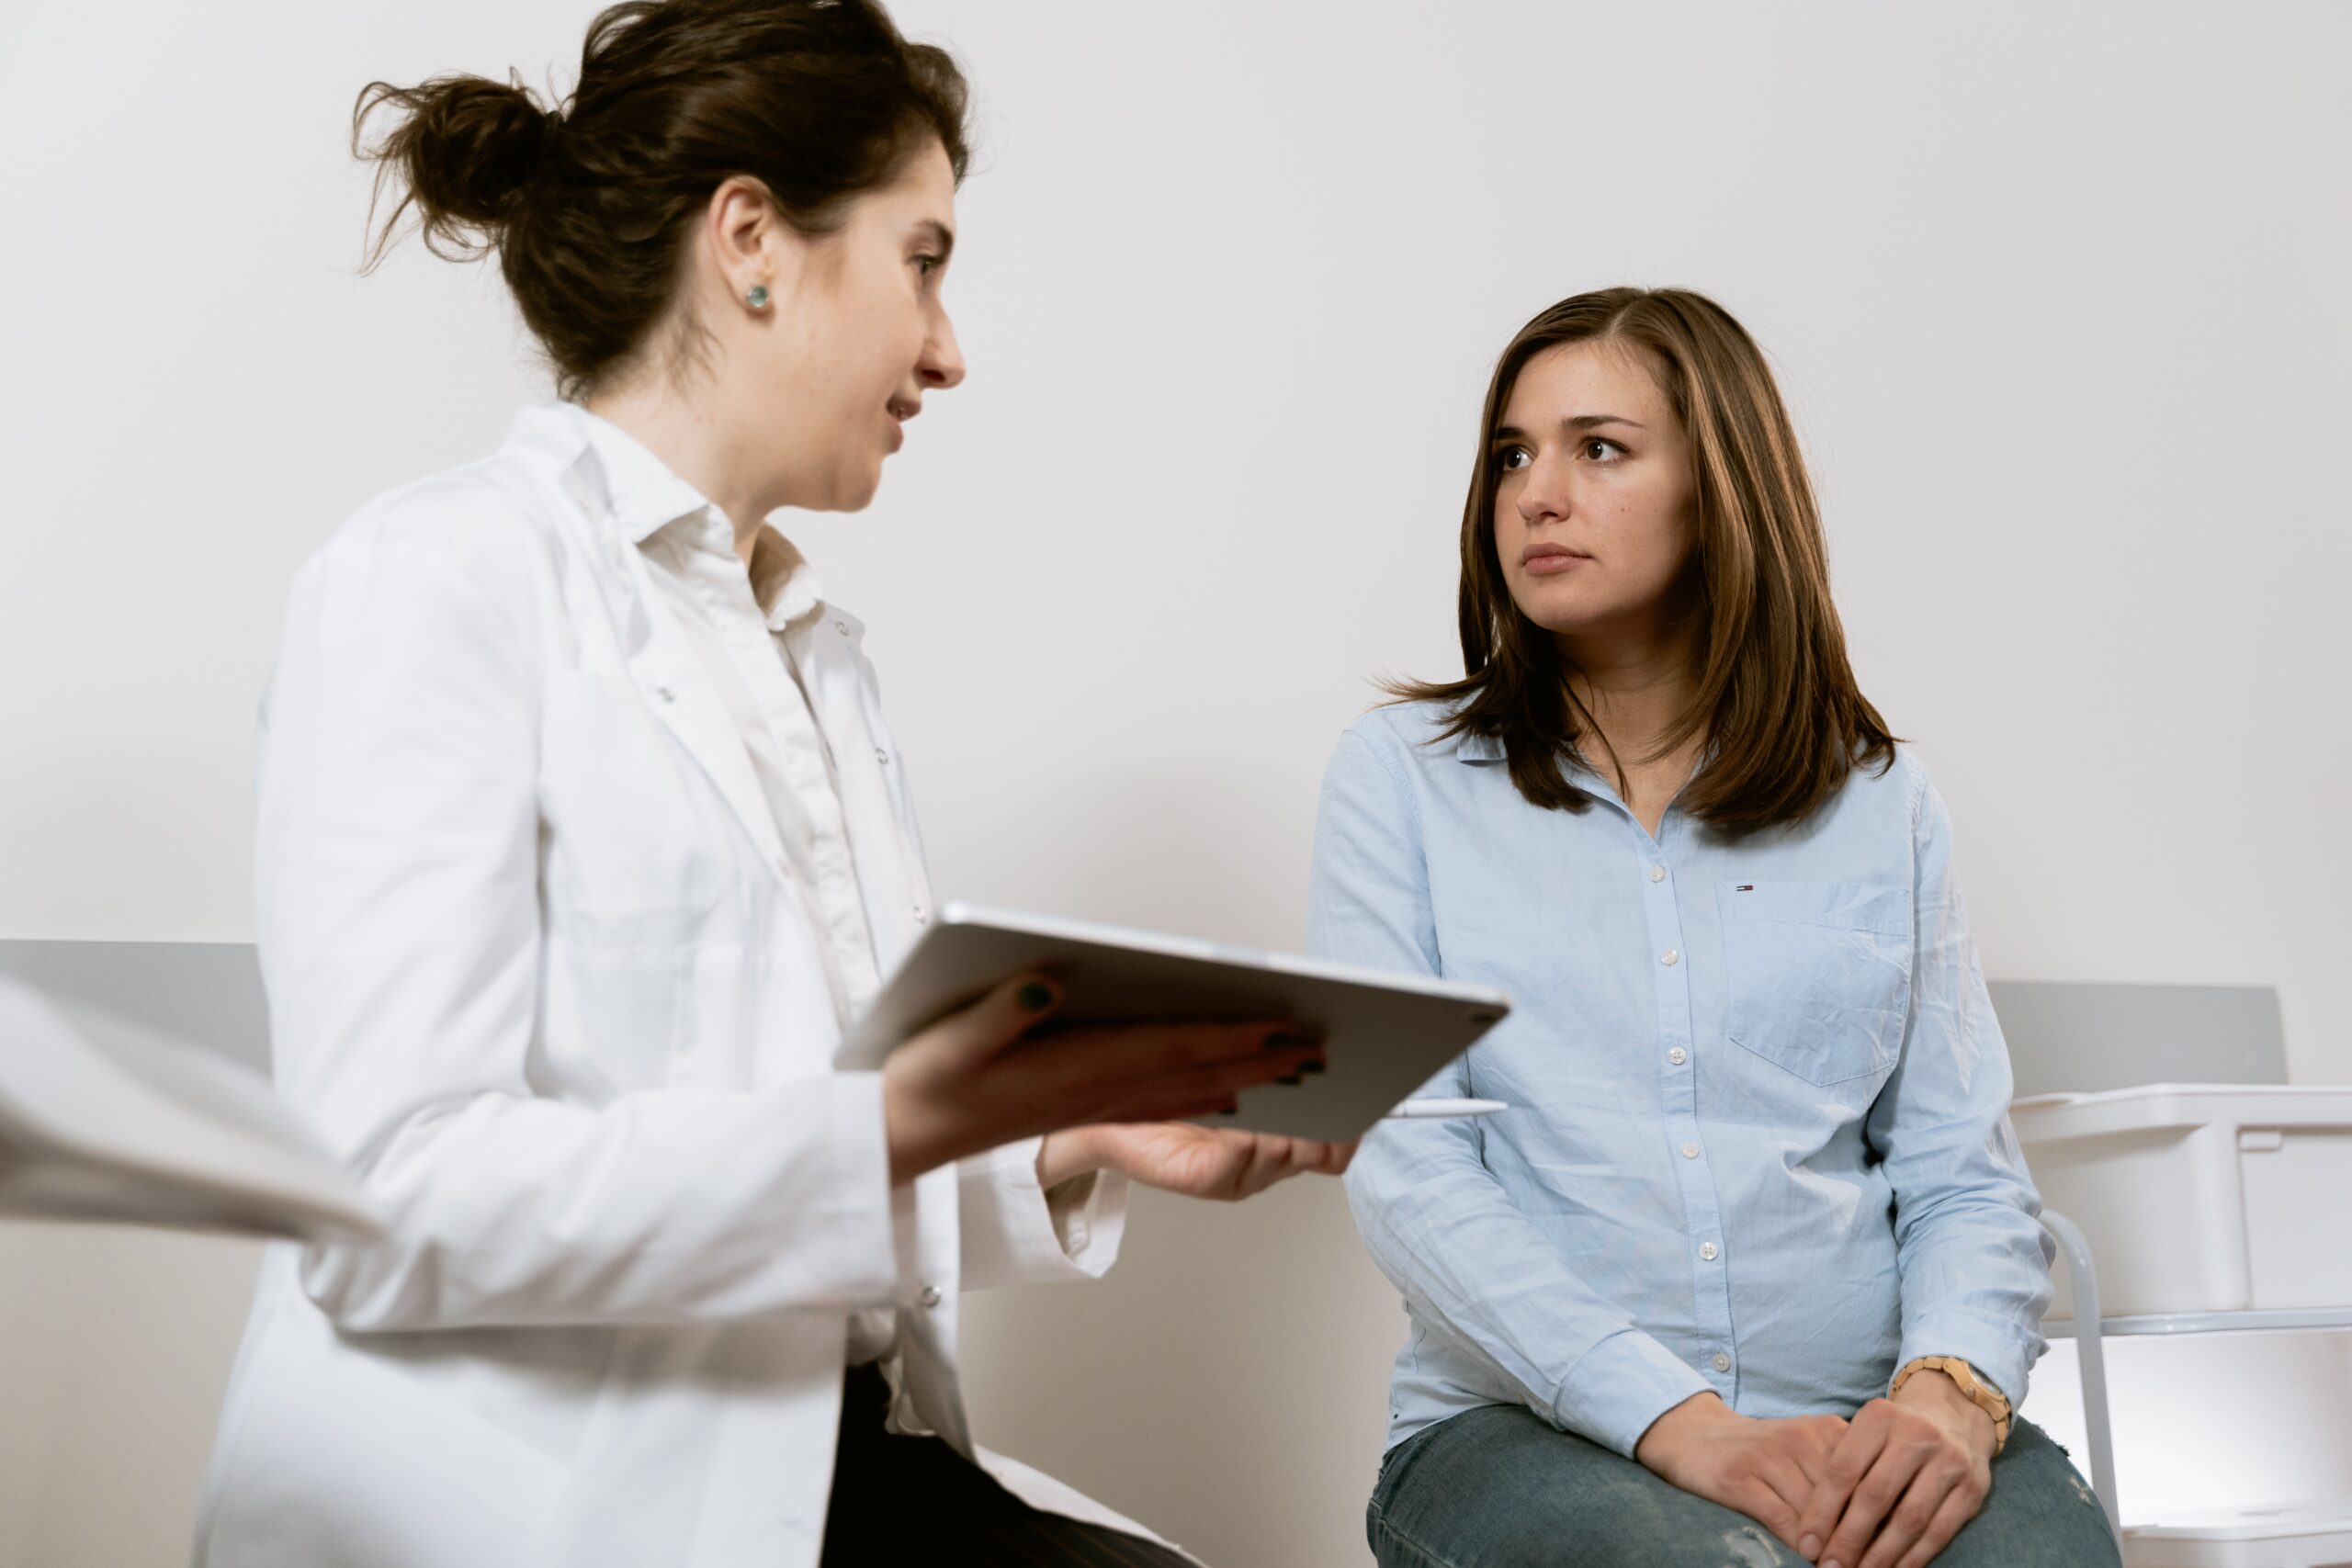 Salford innovation fund - A photo of a female staff member in a white coat holding a tablet computer next to a female patient in a blue shirt. They are looking at each other. The background is white.